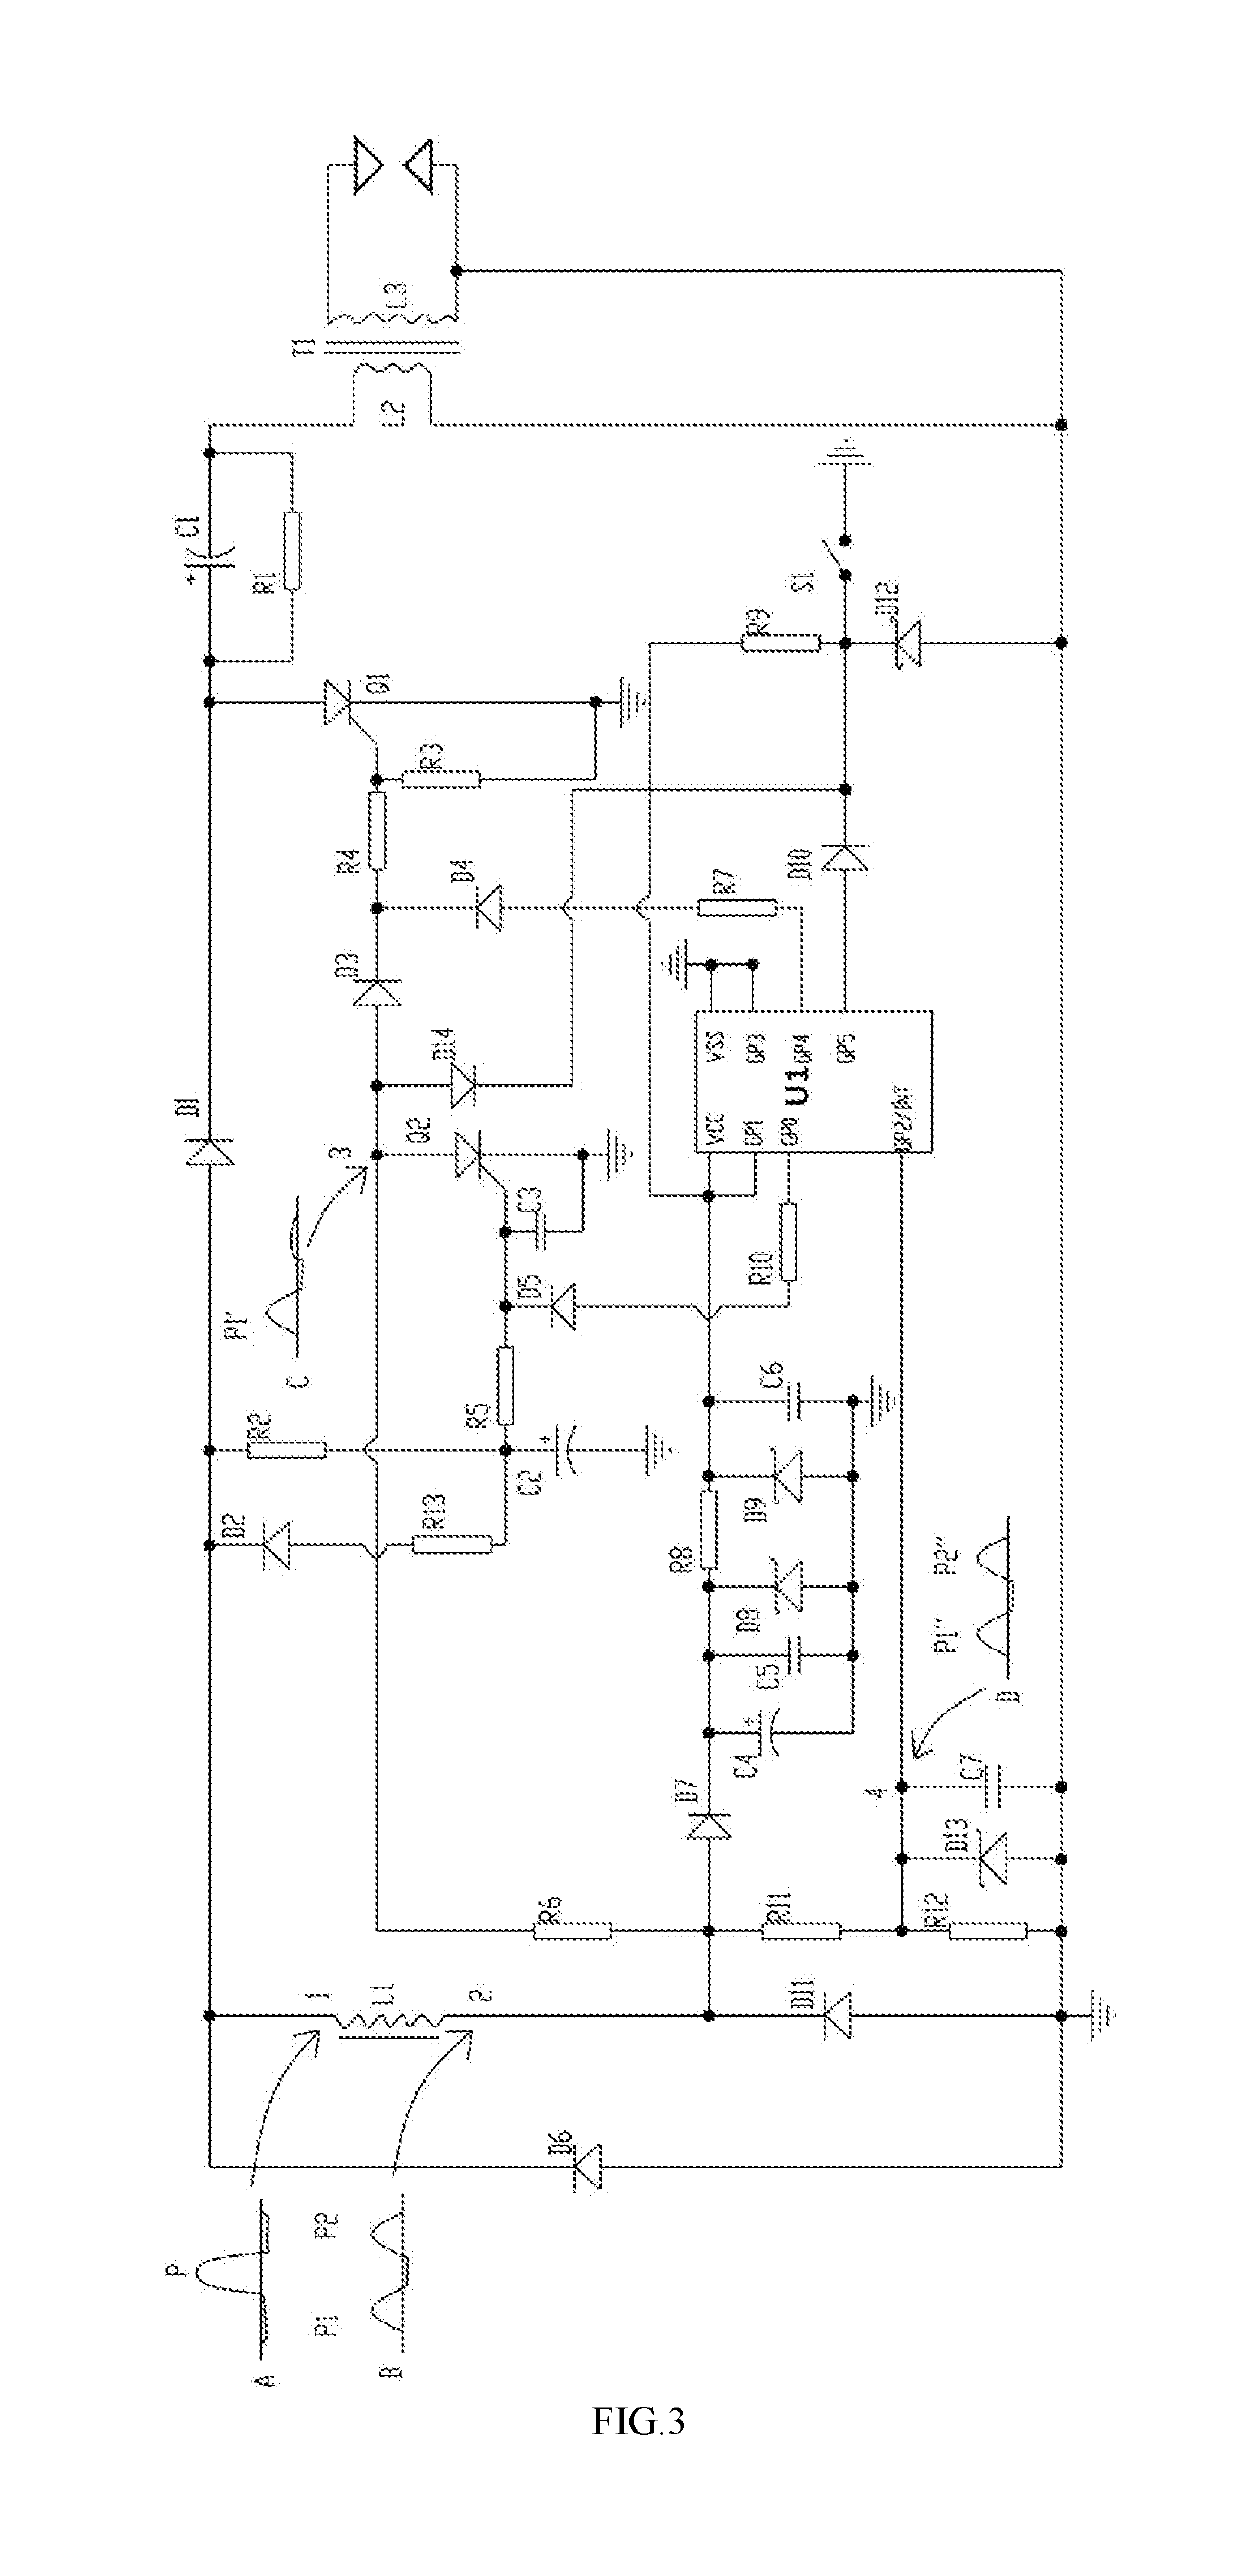 Combined Analog-Digital Gasoline Engine Ignition Method and Device